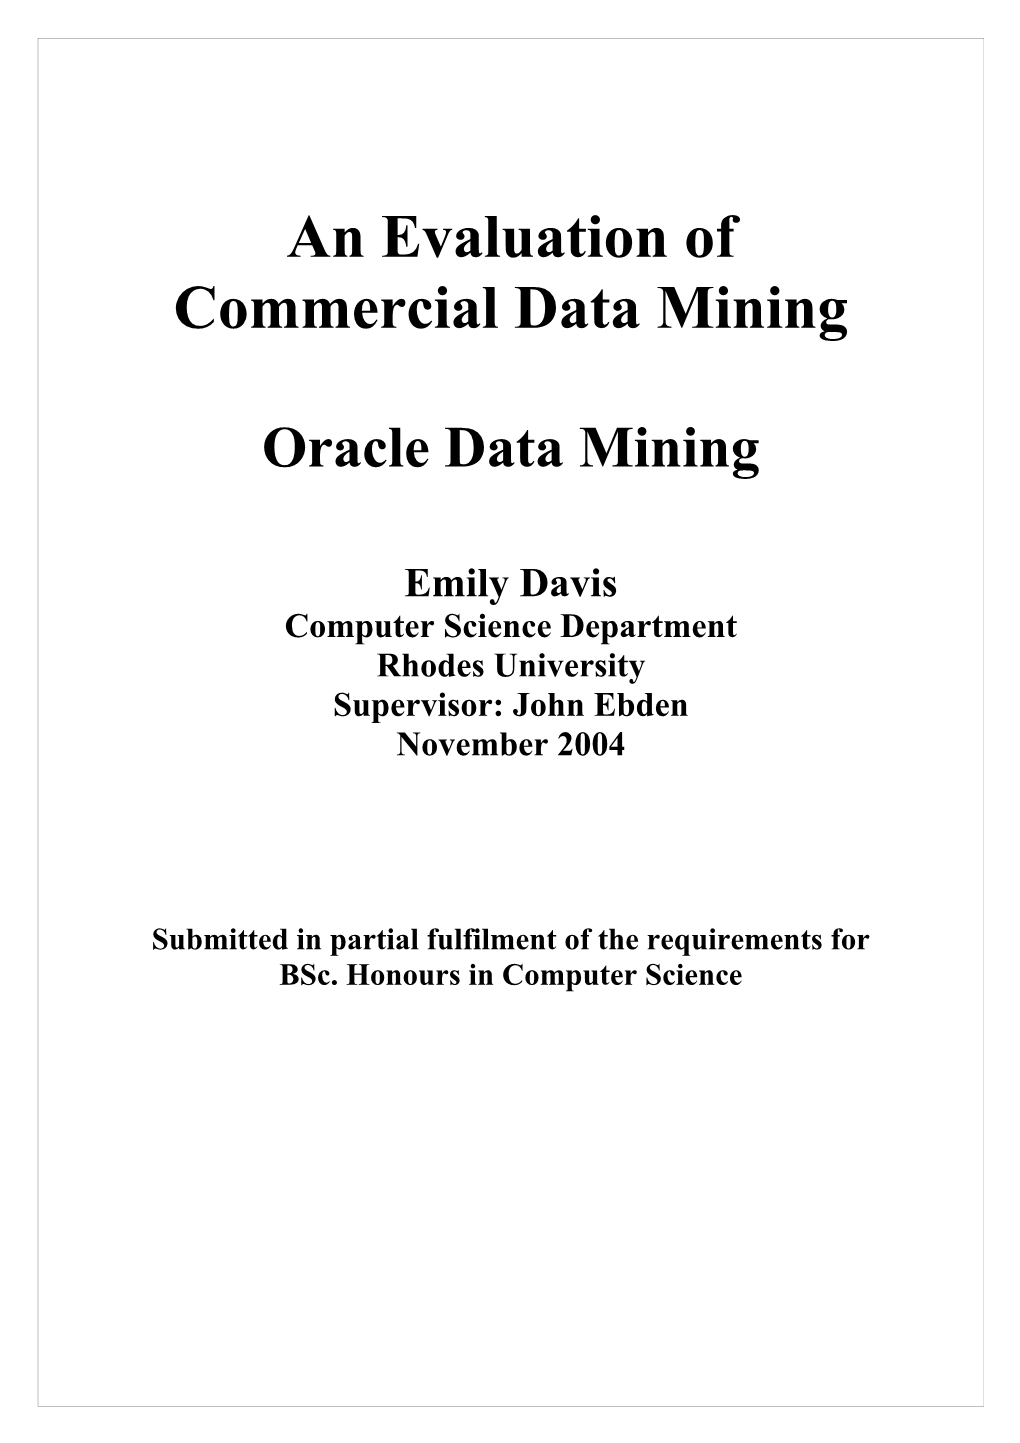 An Evaluation of Commercial Data Mining